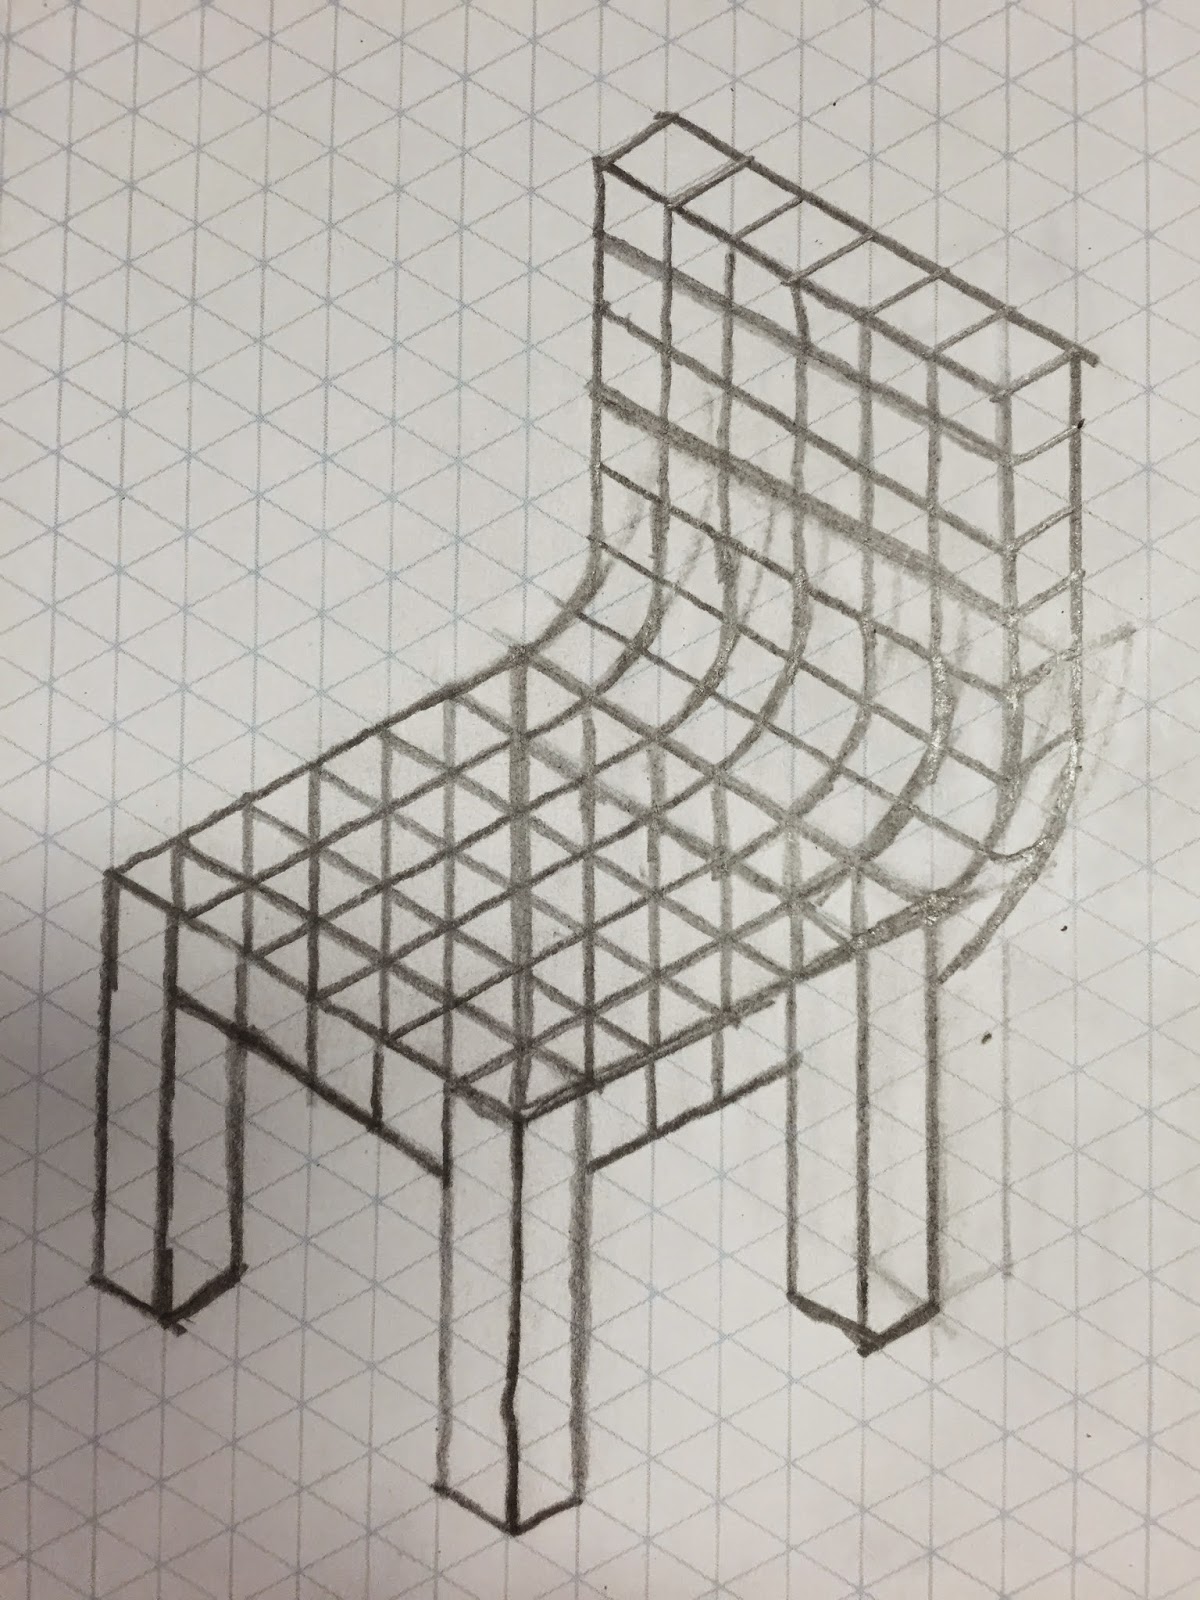 Isometric Drawing Of A Chair at Explore collection